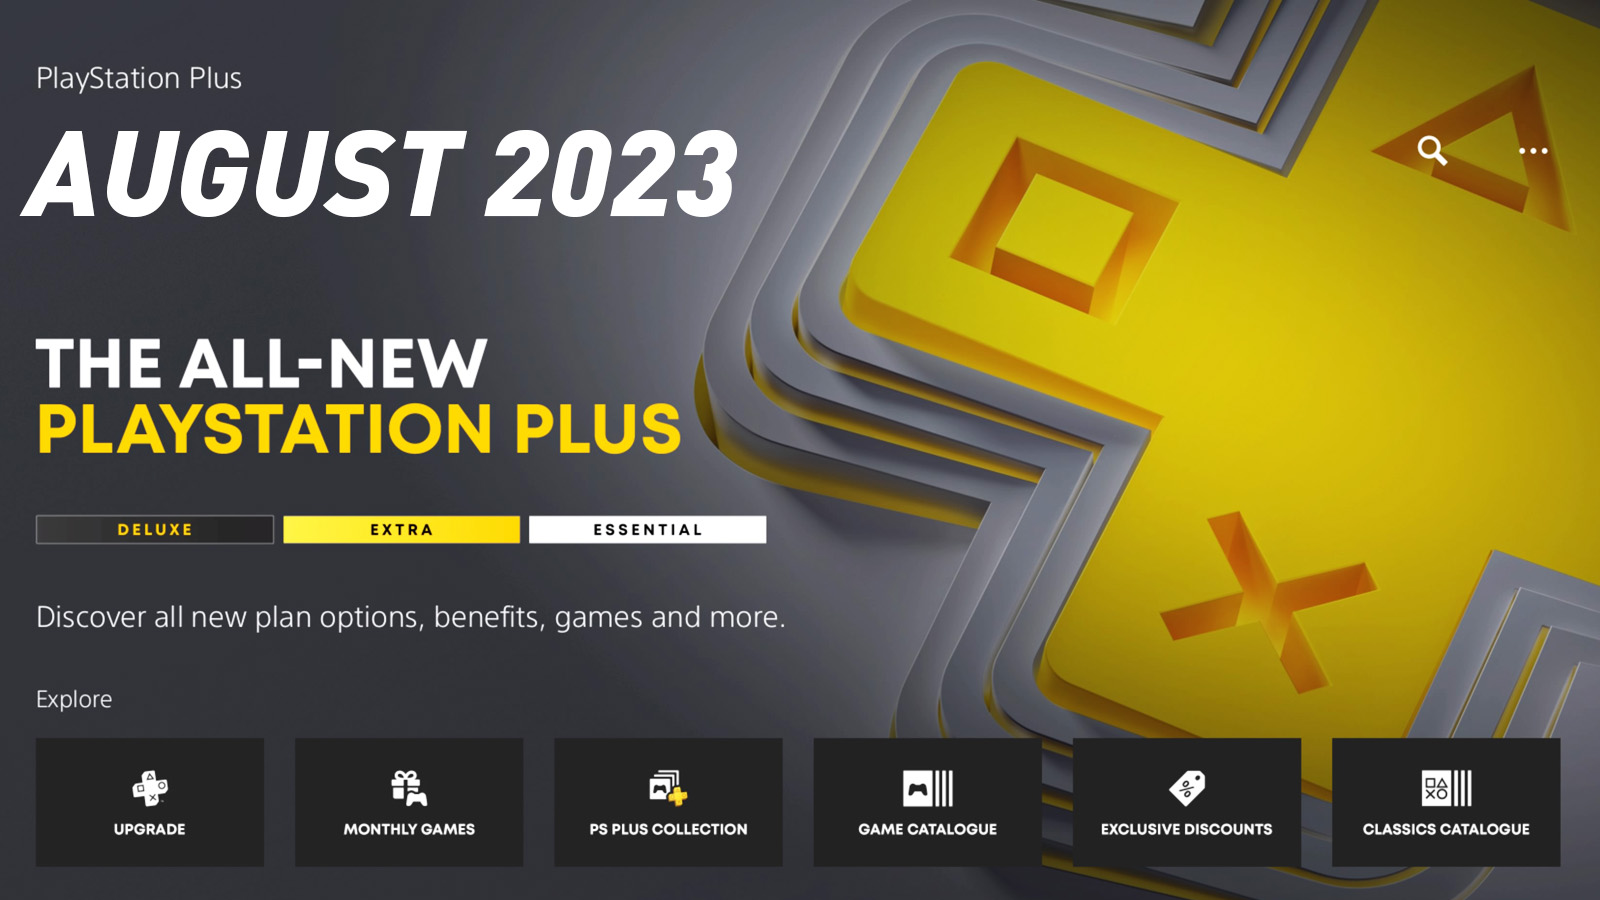 PlayStation Plus Games for August 2023